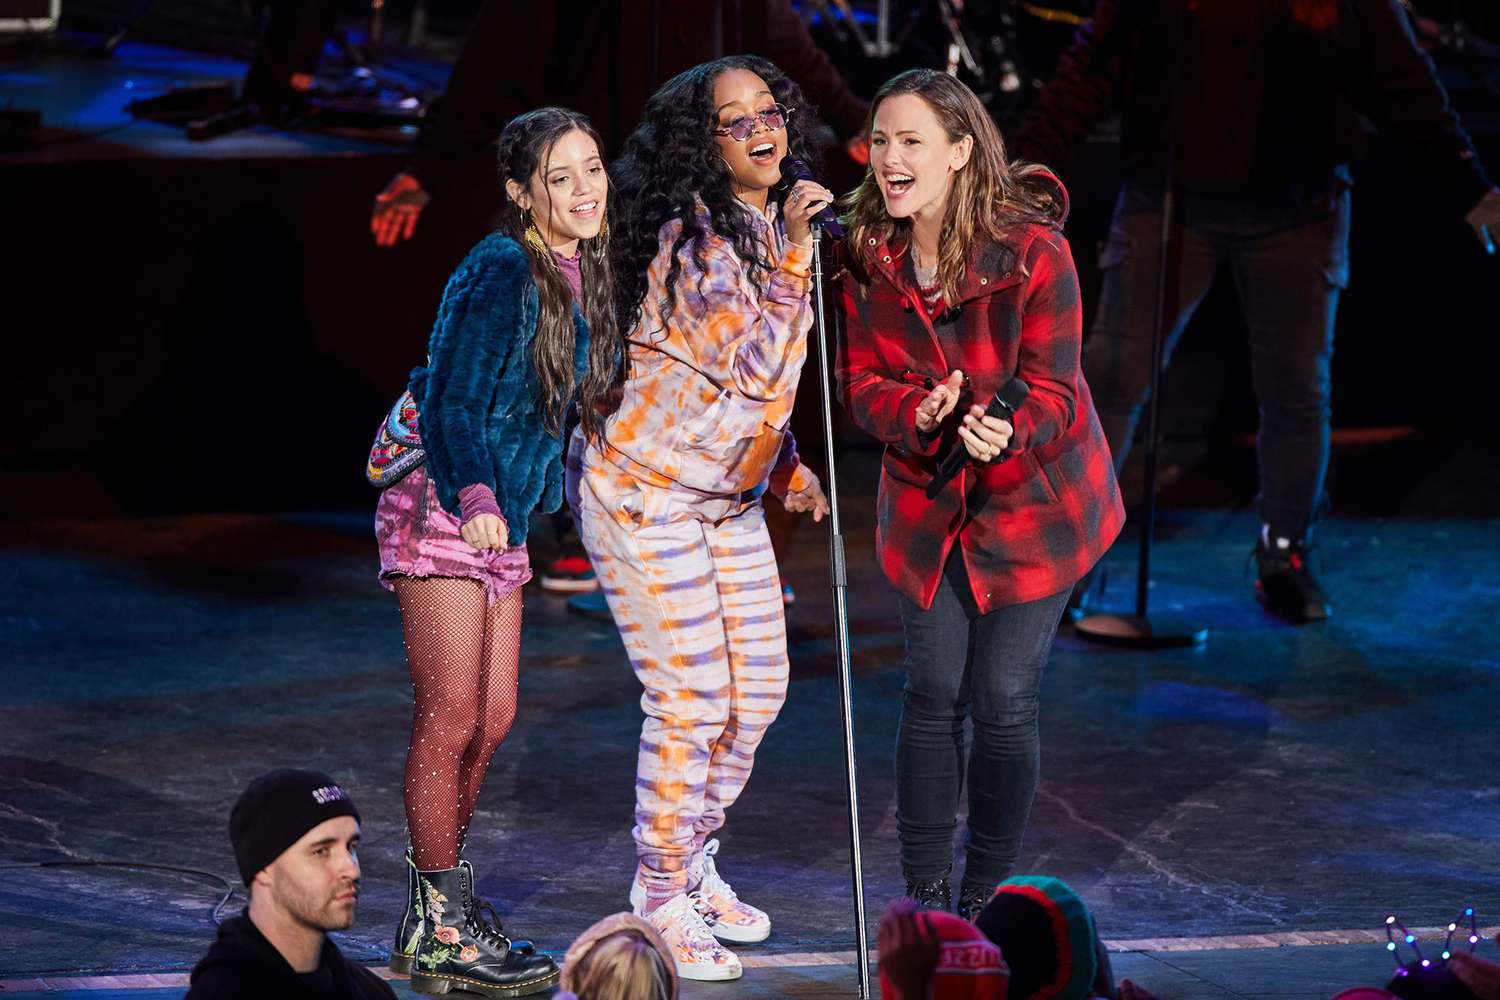 Allison and Katie on stage with H.E.R at a concert. They are all singing.